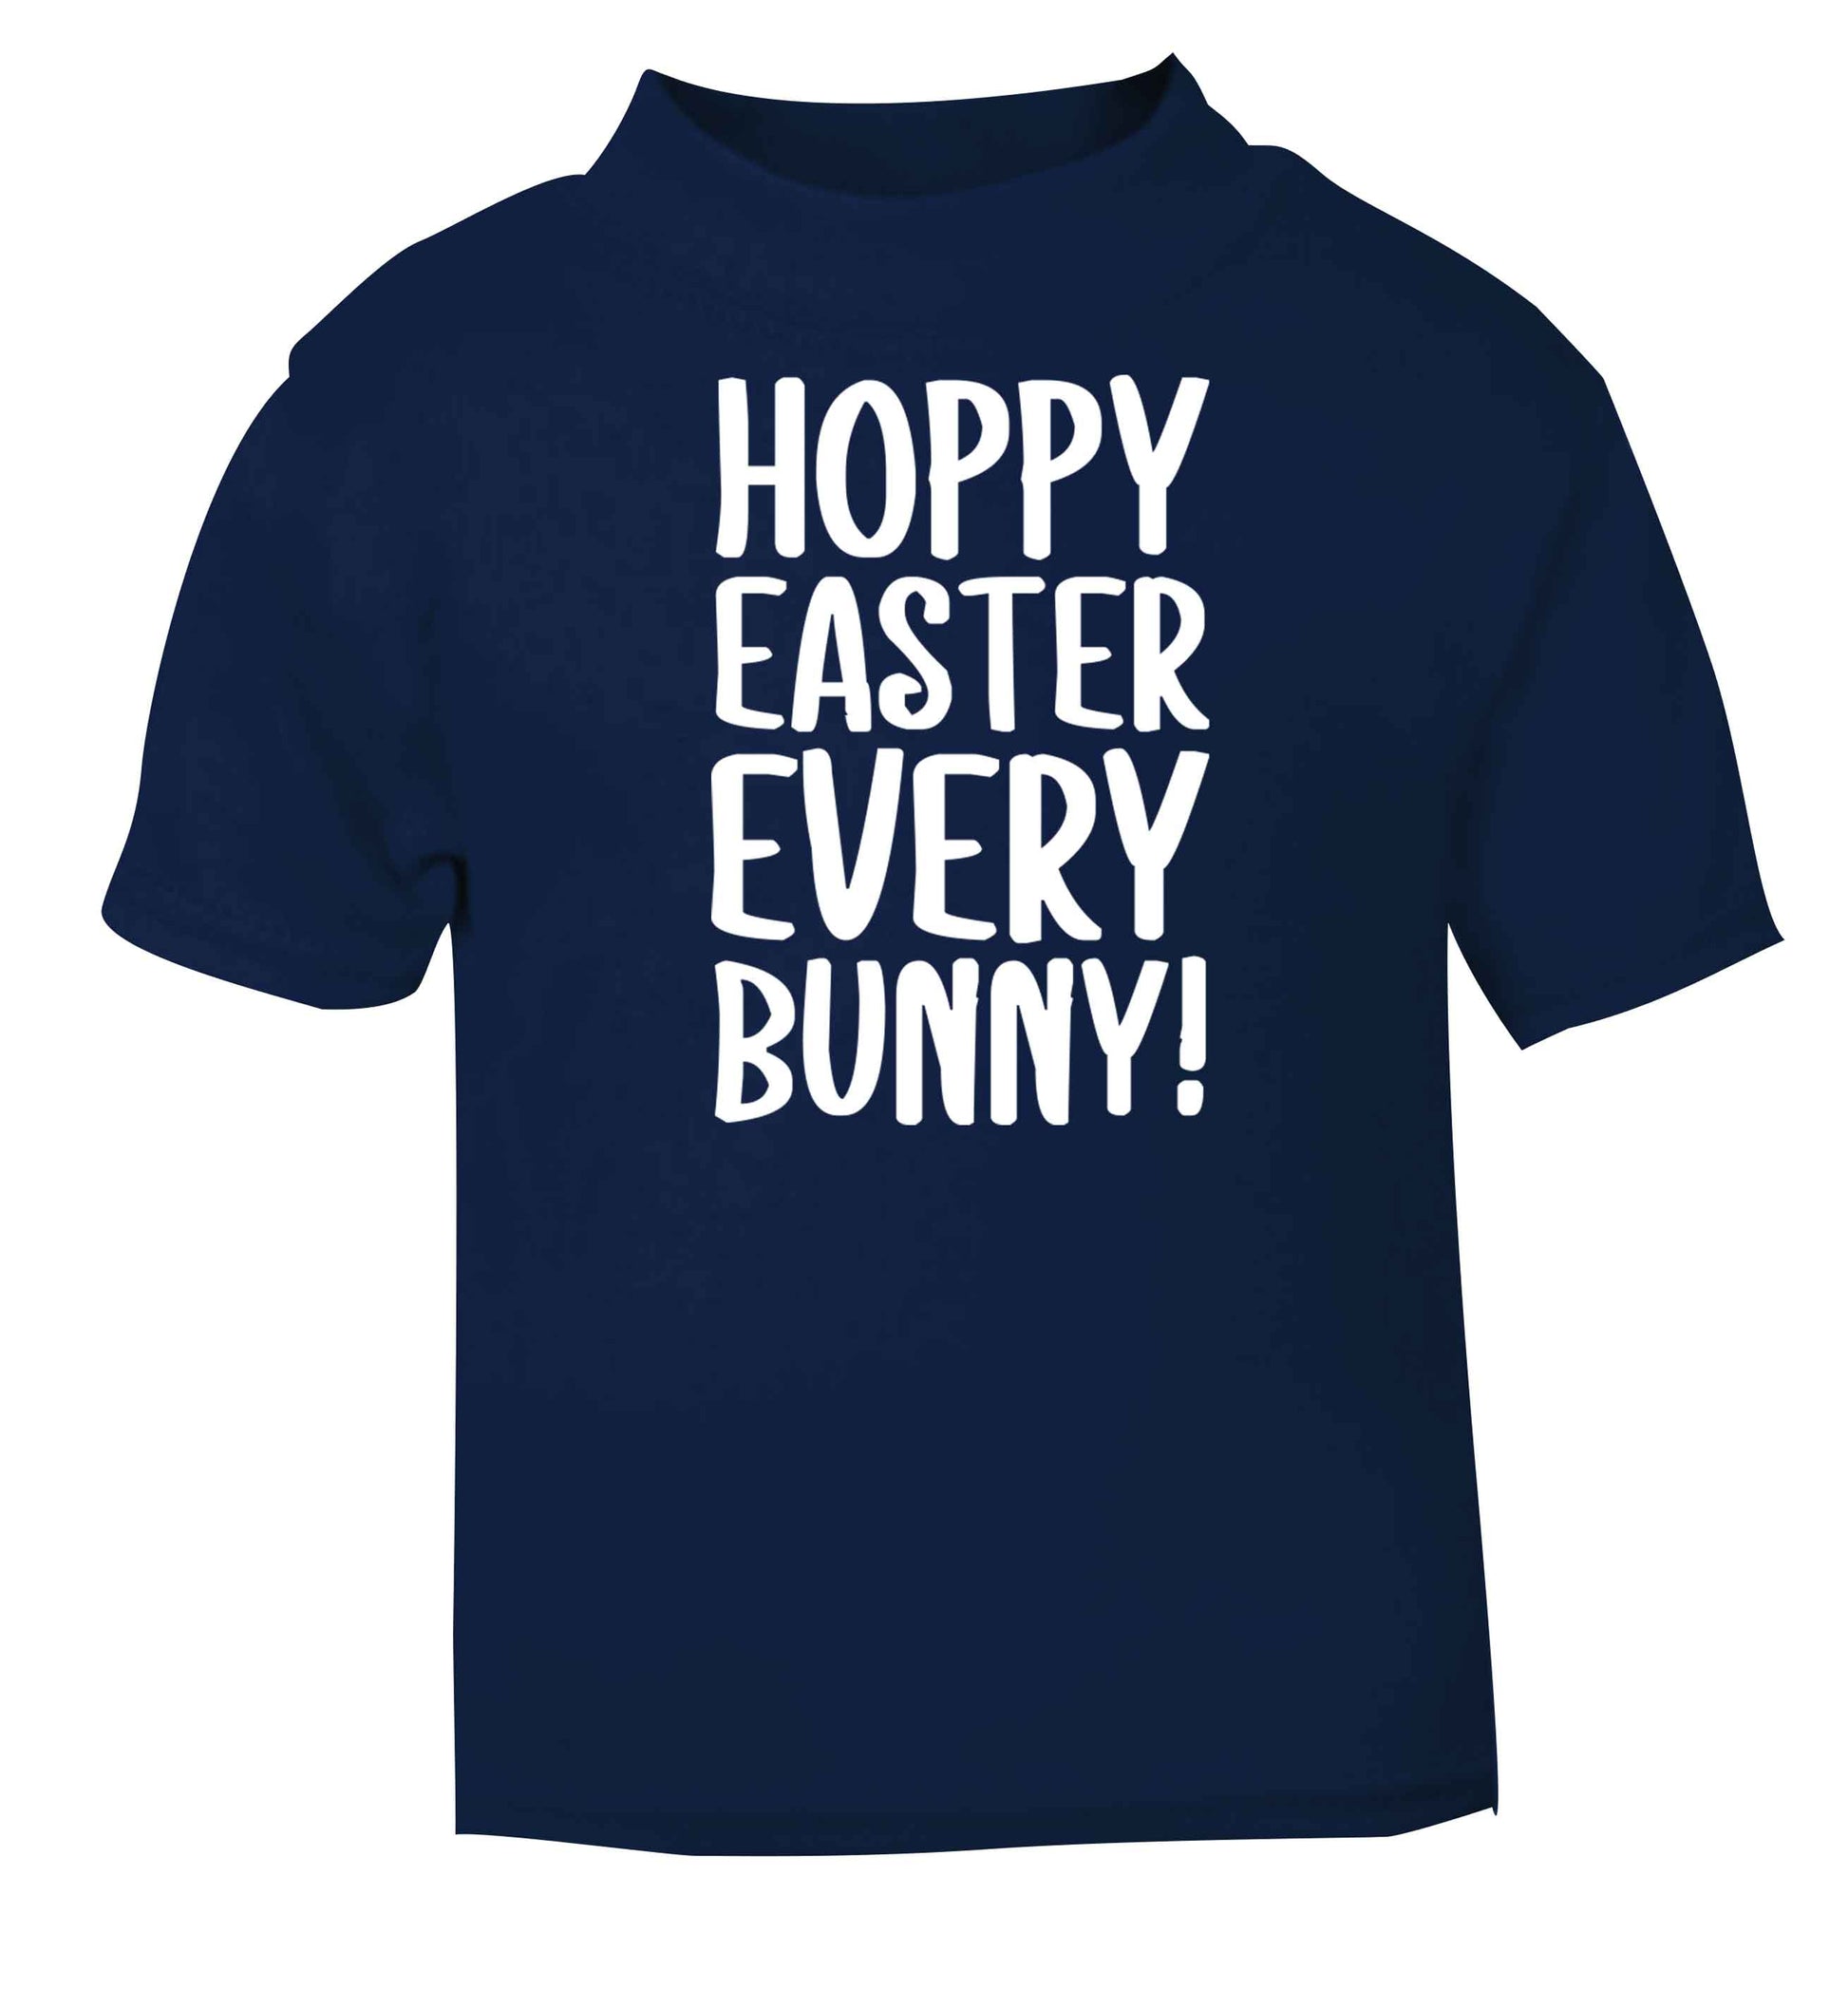 Hoppy Easter every bunny! navy baby toddler Tshirt 2 Years